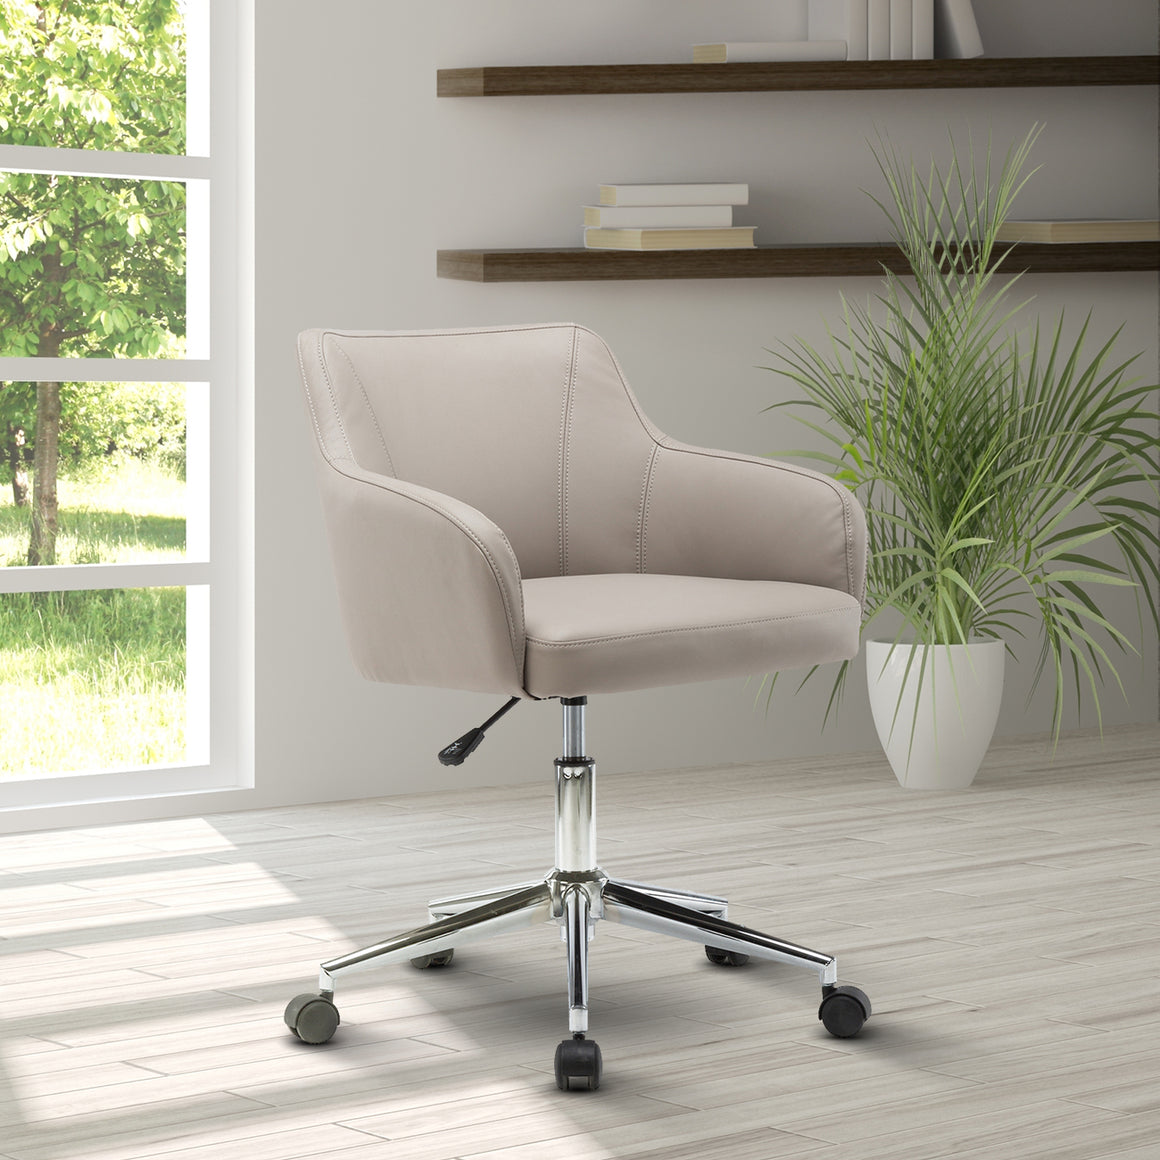 Comfy and Classy Office & Home Office Chair